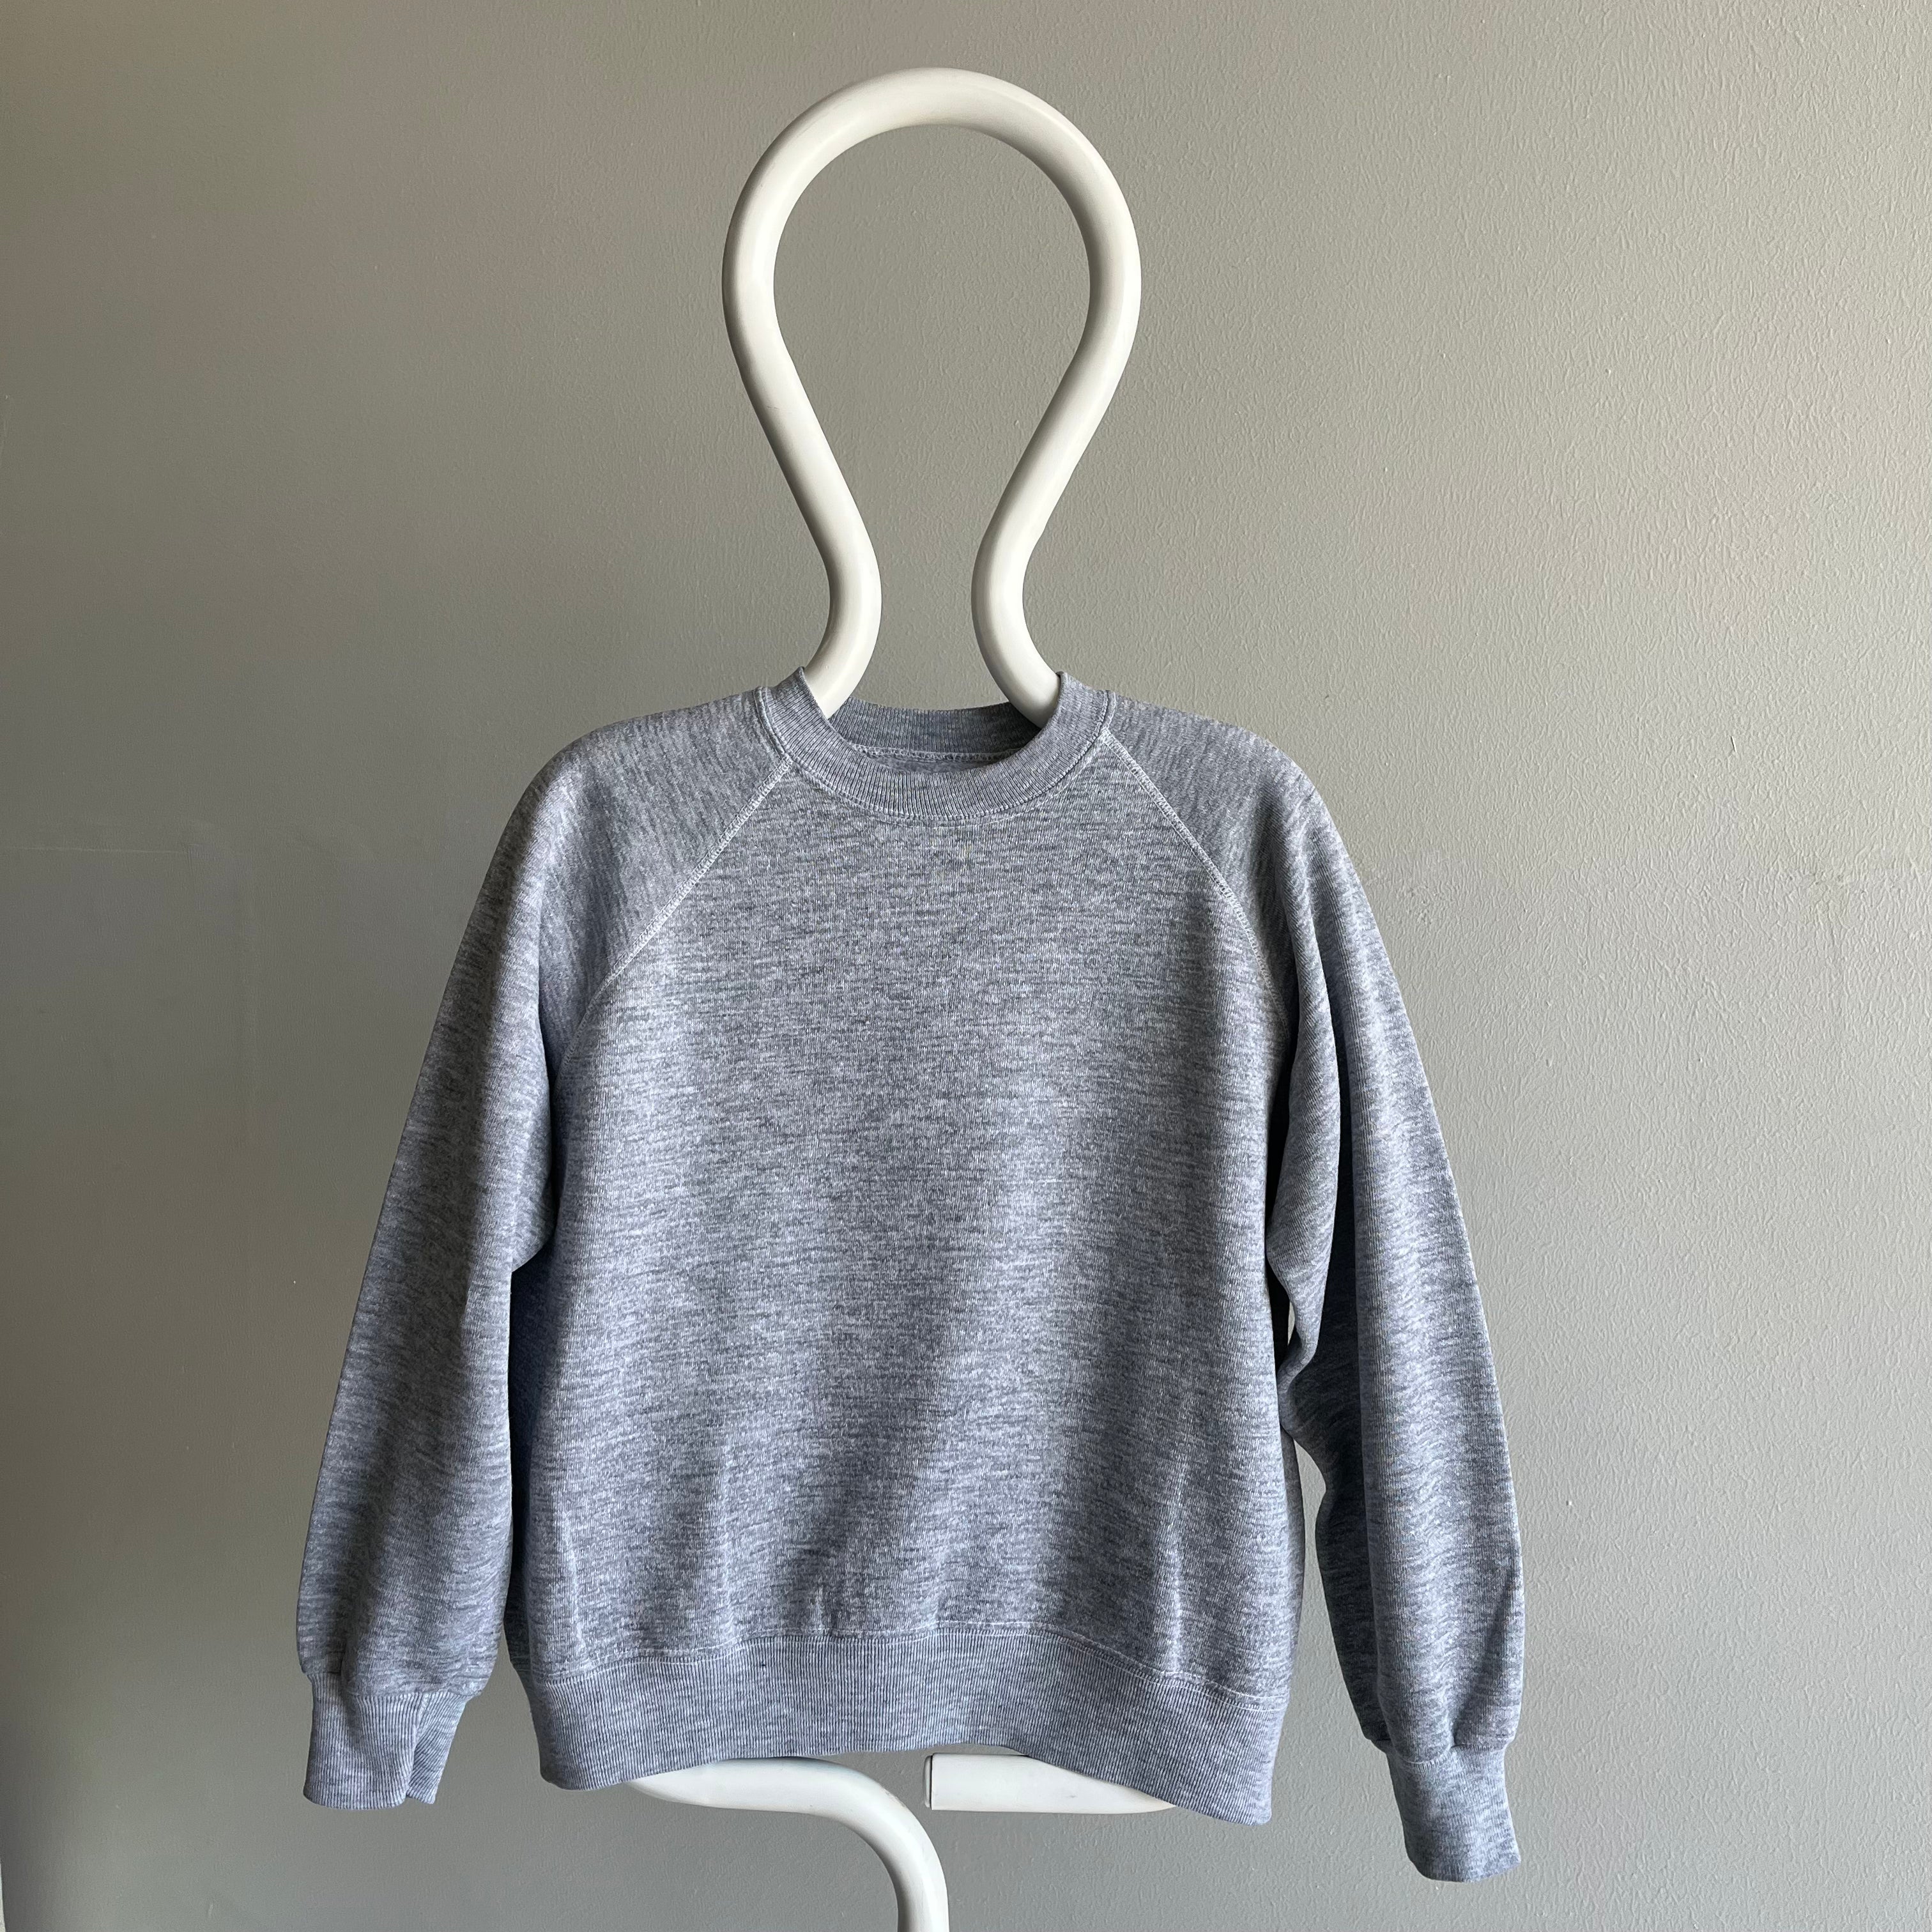 1970/80s Blank Gray Sweatshirt - Personal Collection - A Grade